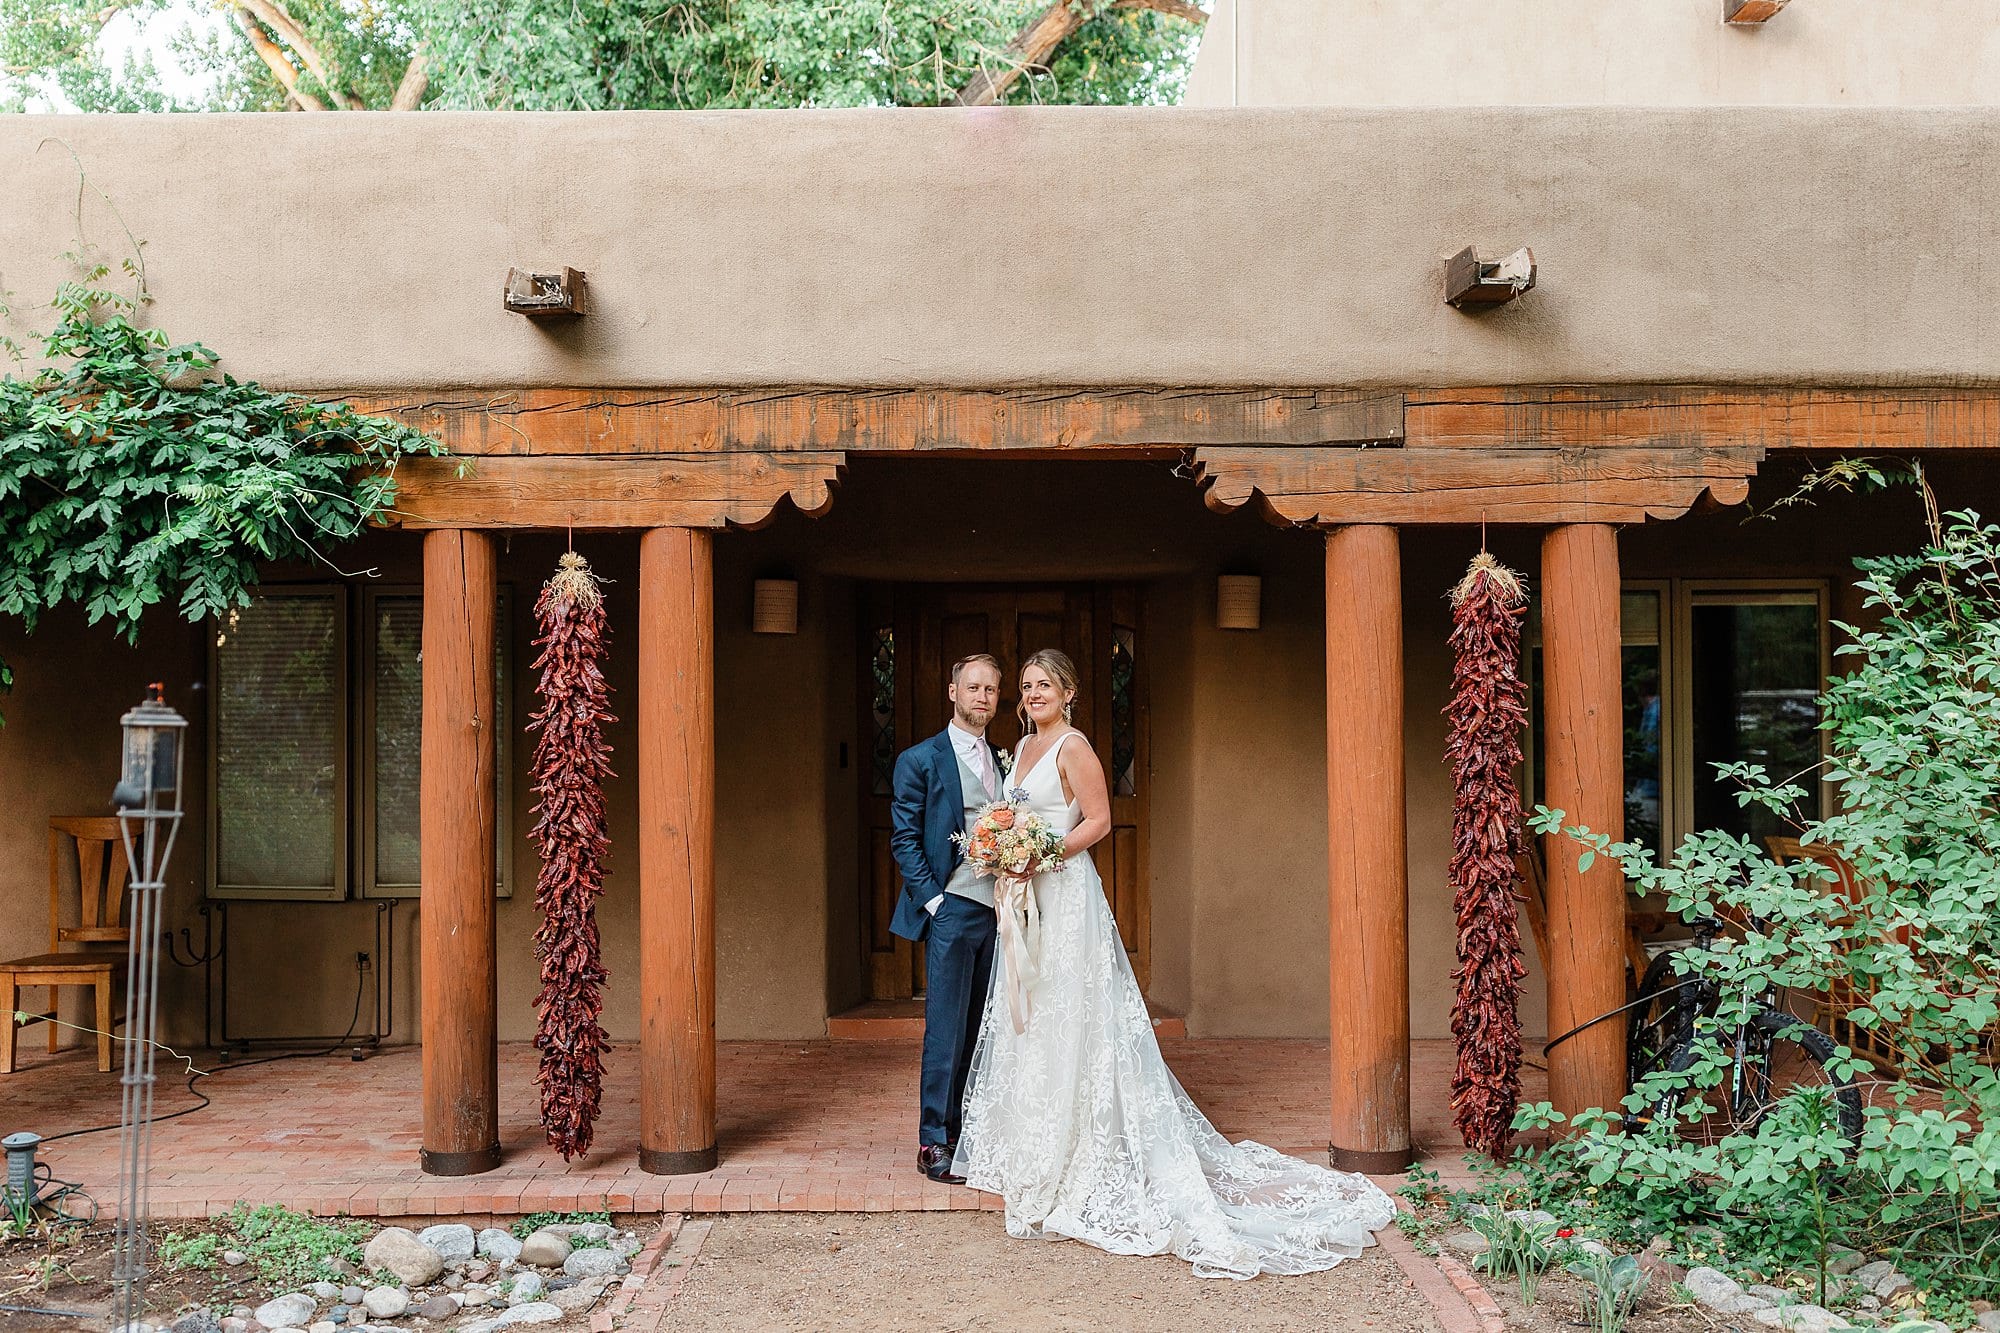 A couple poses in wedding attire in New Mexico